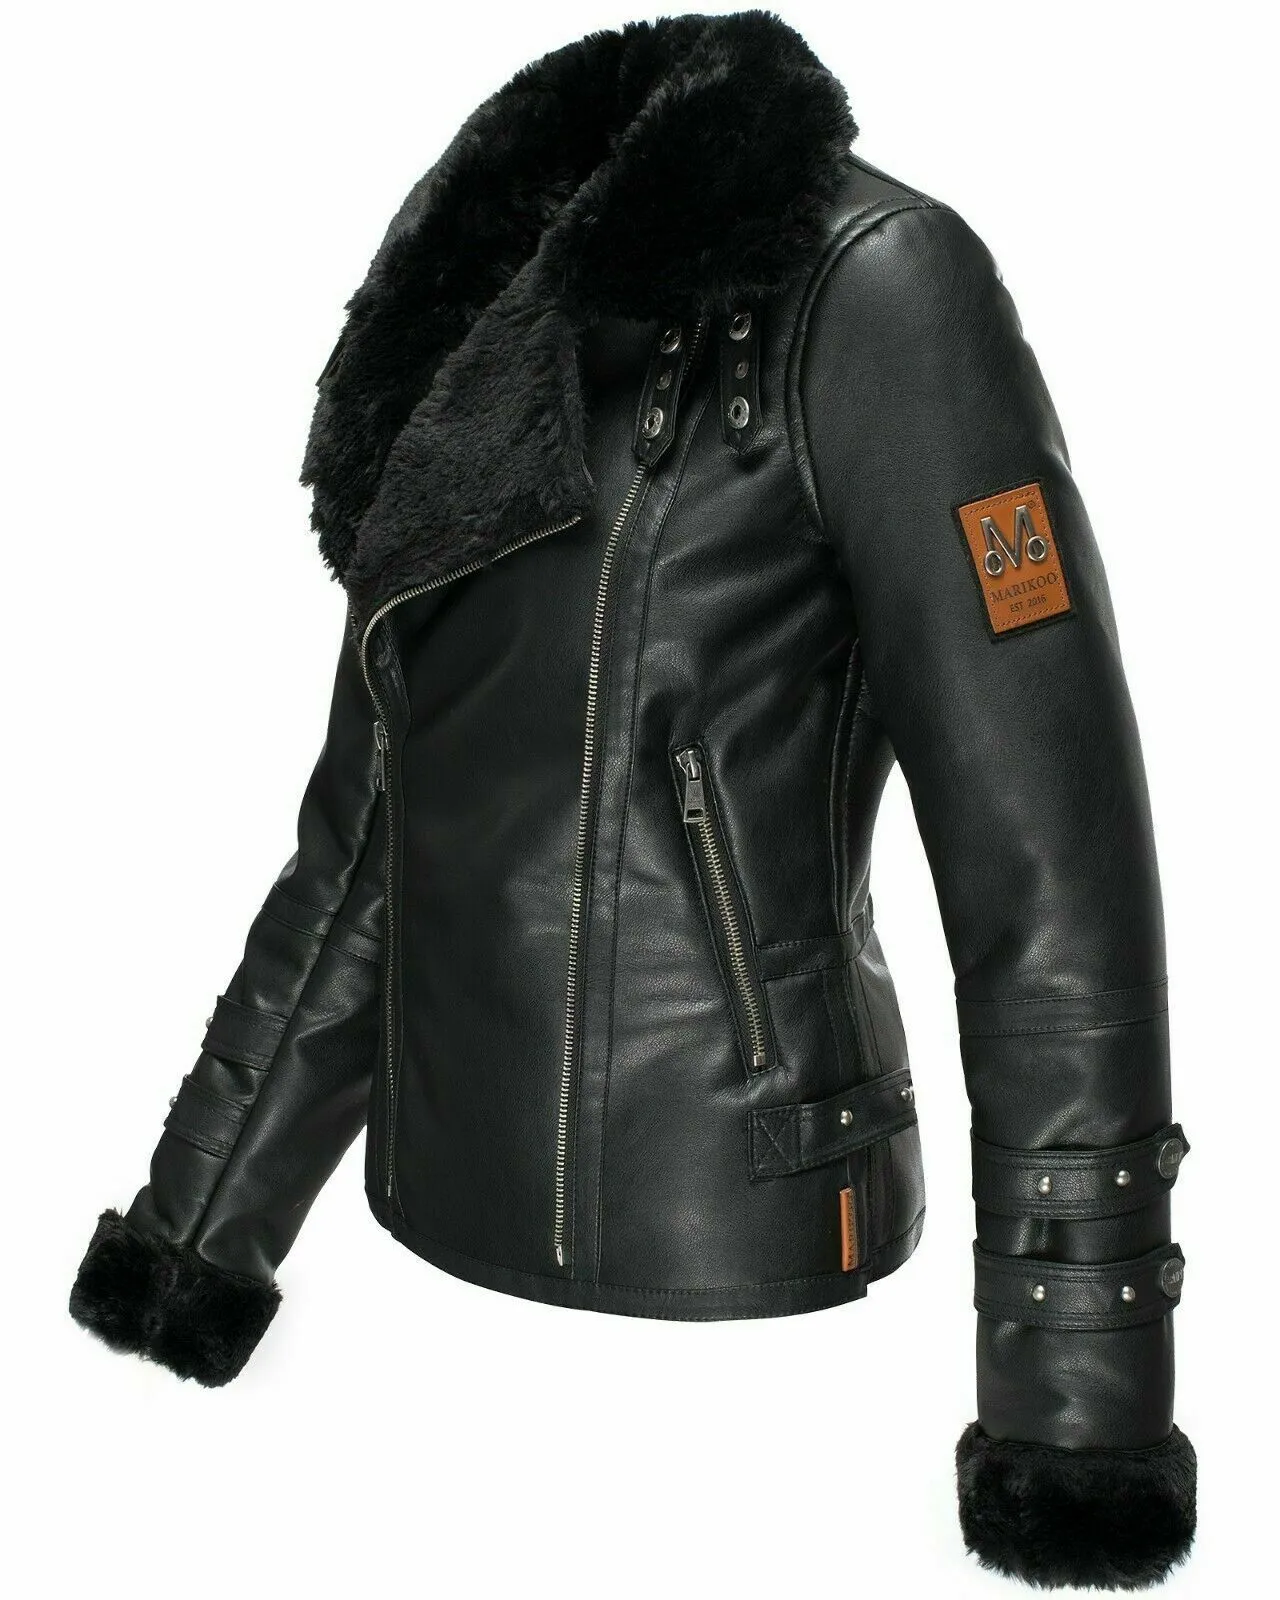 Women's fall/winter jacket with faux leather lining motorcycle jacket